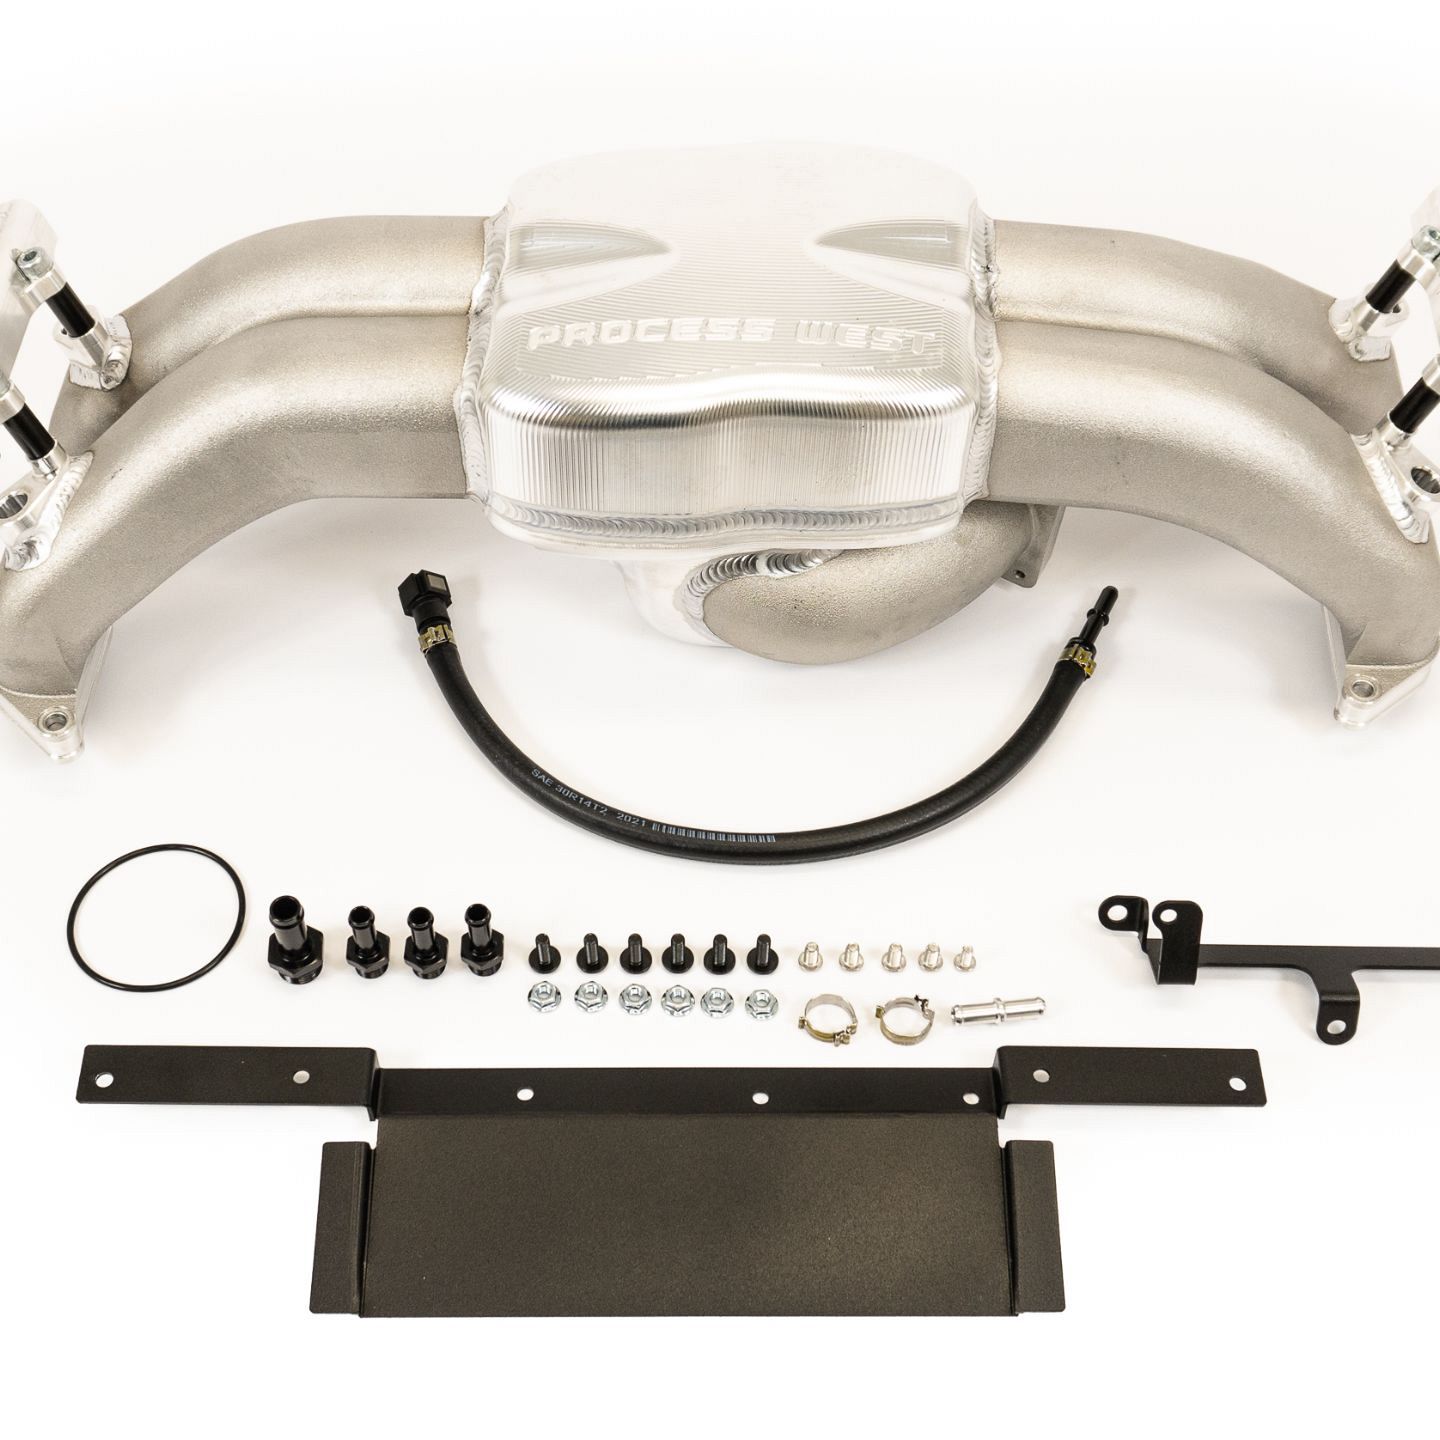 FA 2L WRX Intake Manifold With Port Injection Fuel Rails